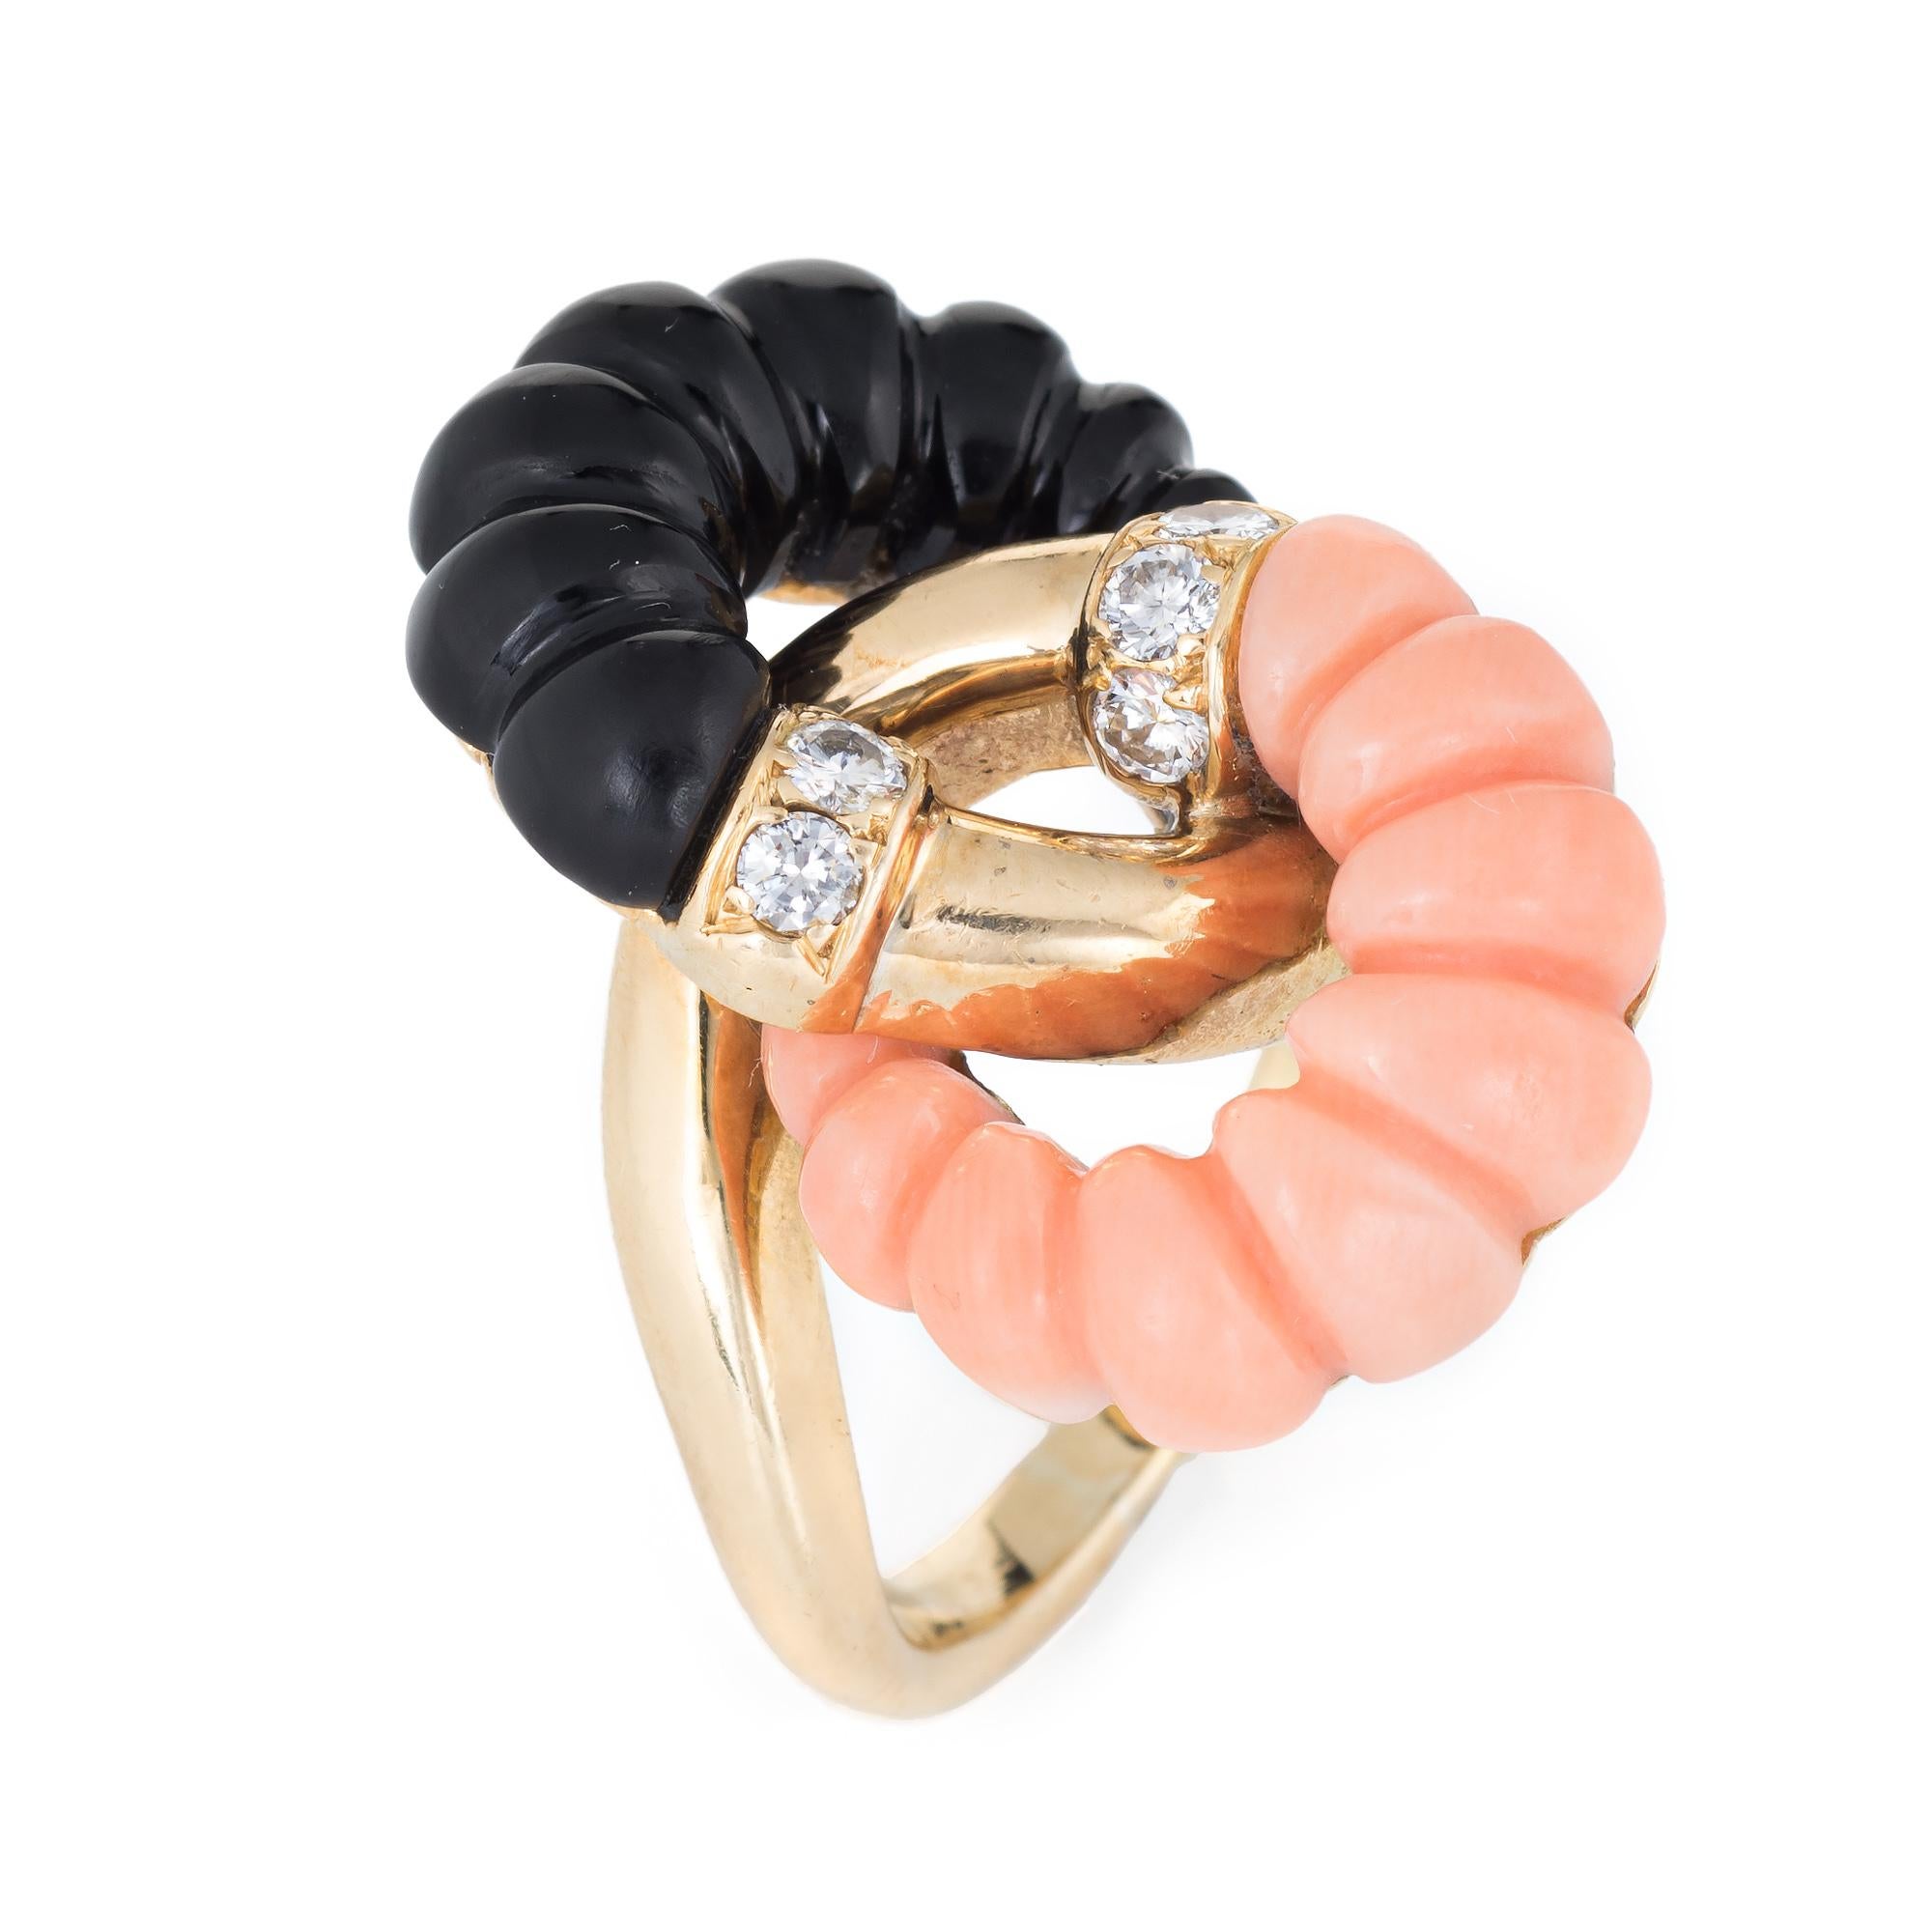 Stylish vintage fluted coral & onyx cocktail ring (circa 1950s to 1960s), crafted in 18 karat yellow gold. 

Fluted coral & onyx measures 7mm wide. Six estimated 0.03 carat round brilliant cut diamonds total an estimated 0.18 carats (estimated at